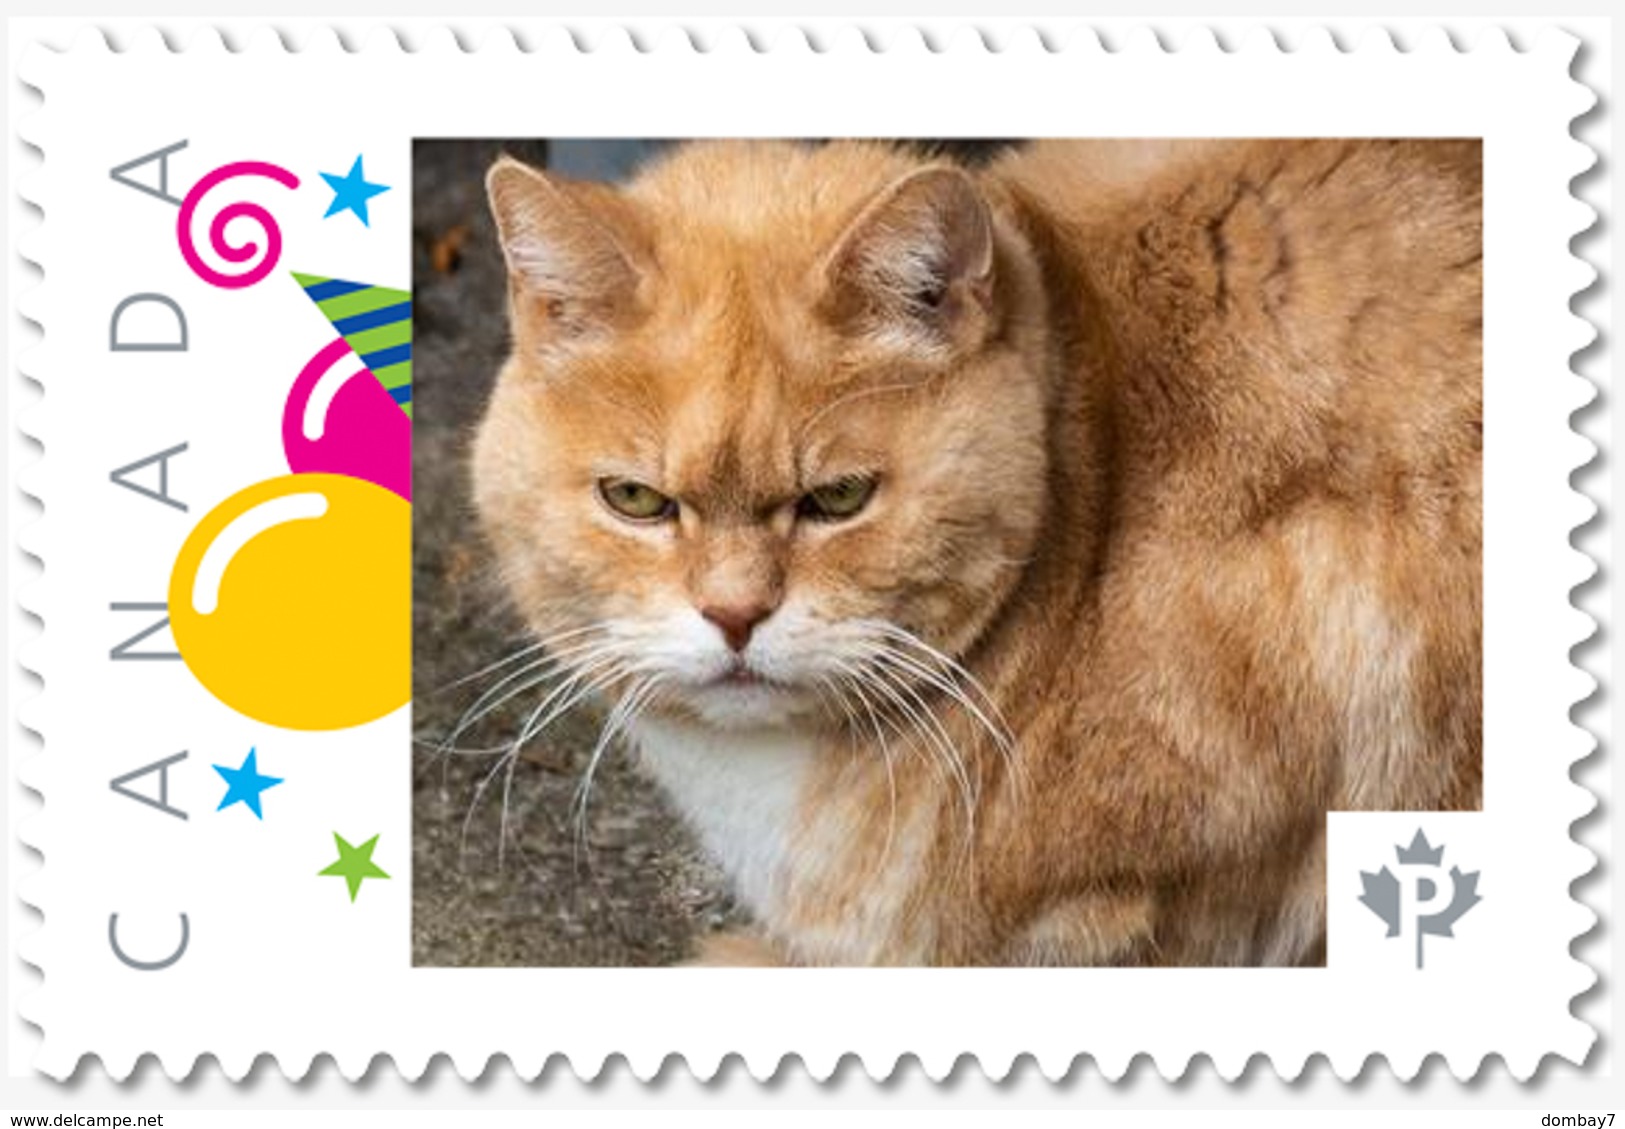 Grumpy CAT = Picture Postage Stamp MNH Canada 2018 [p18-09-26] - Domestic Cats